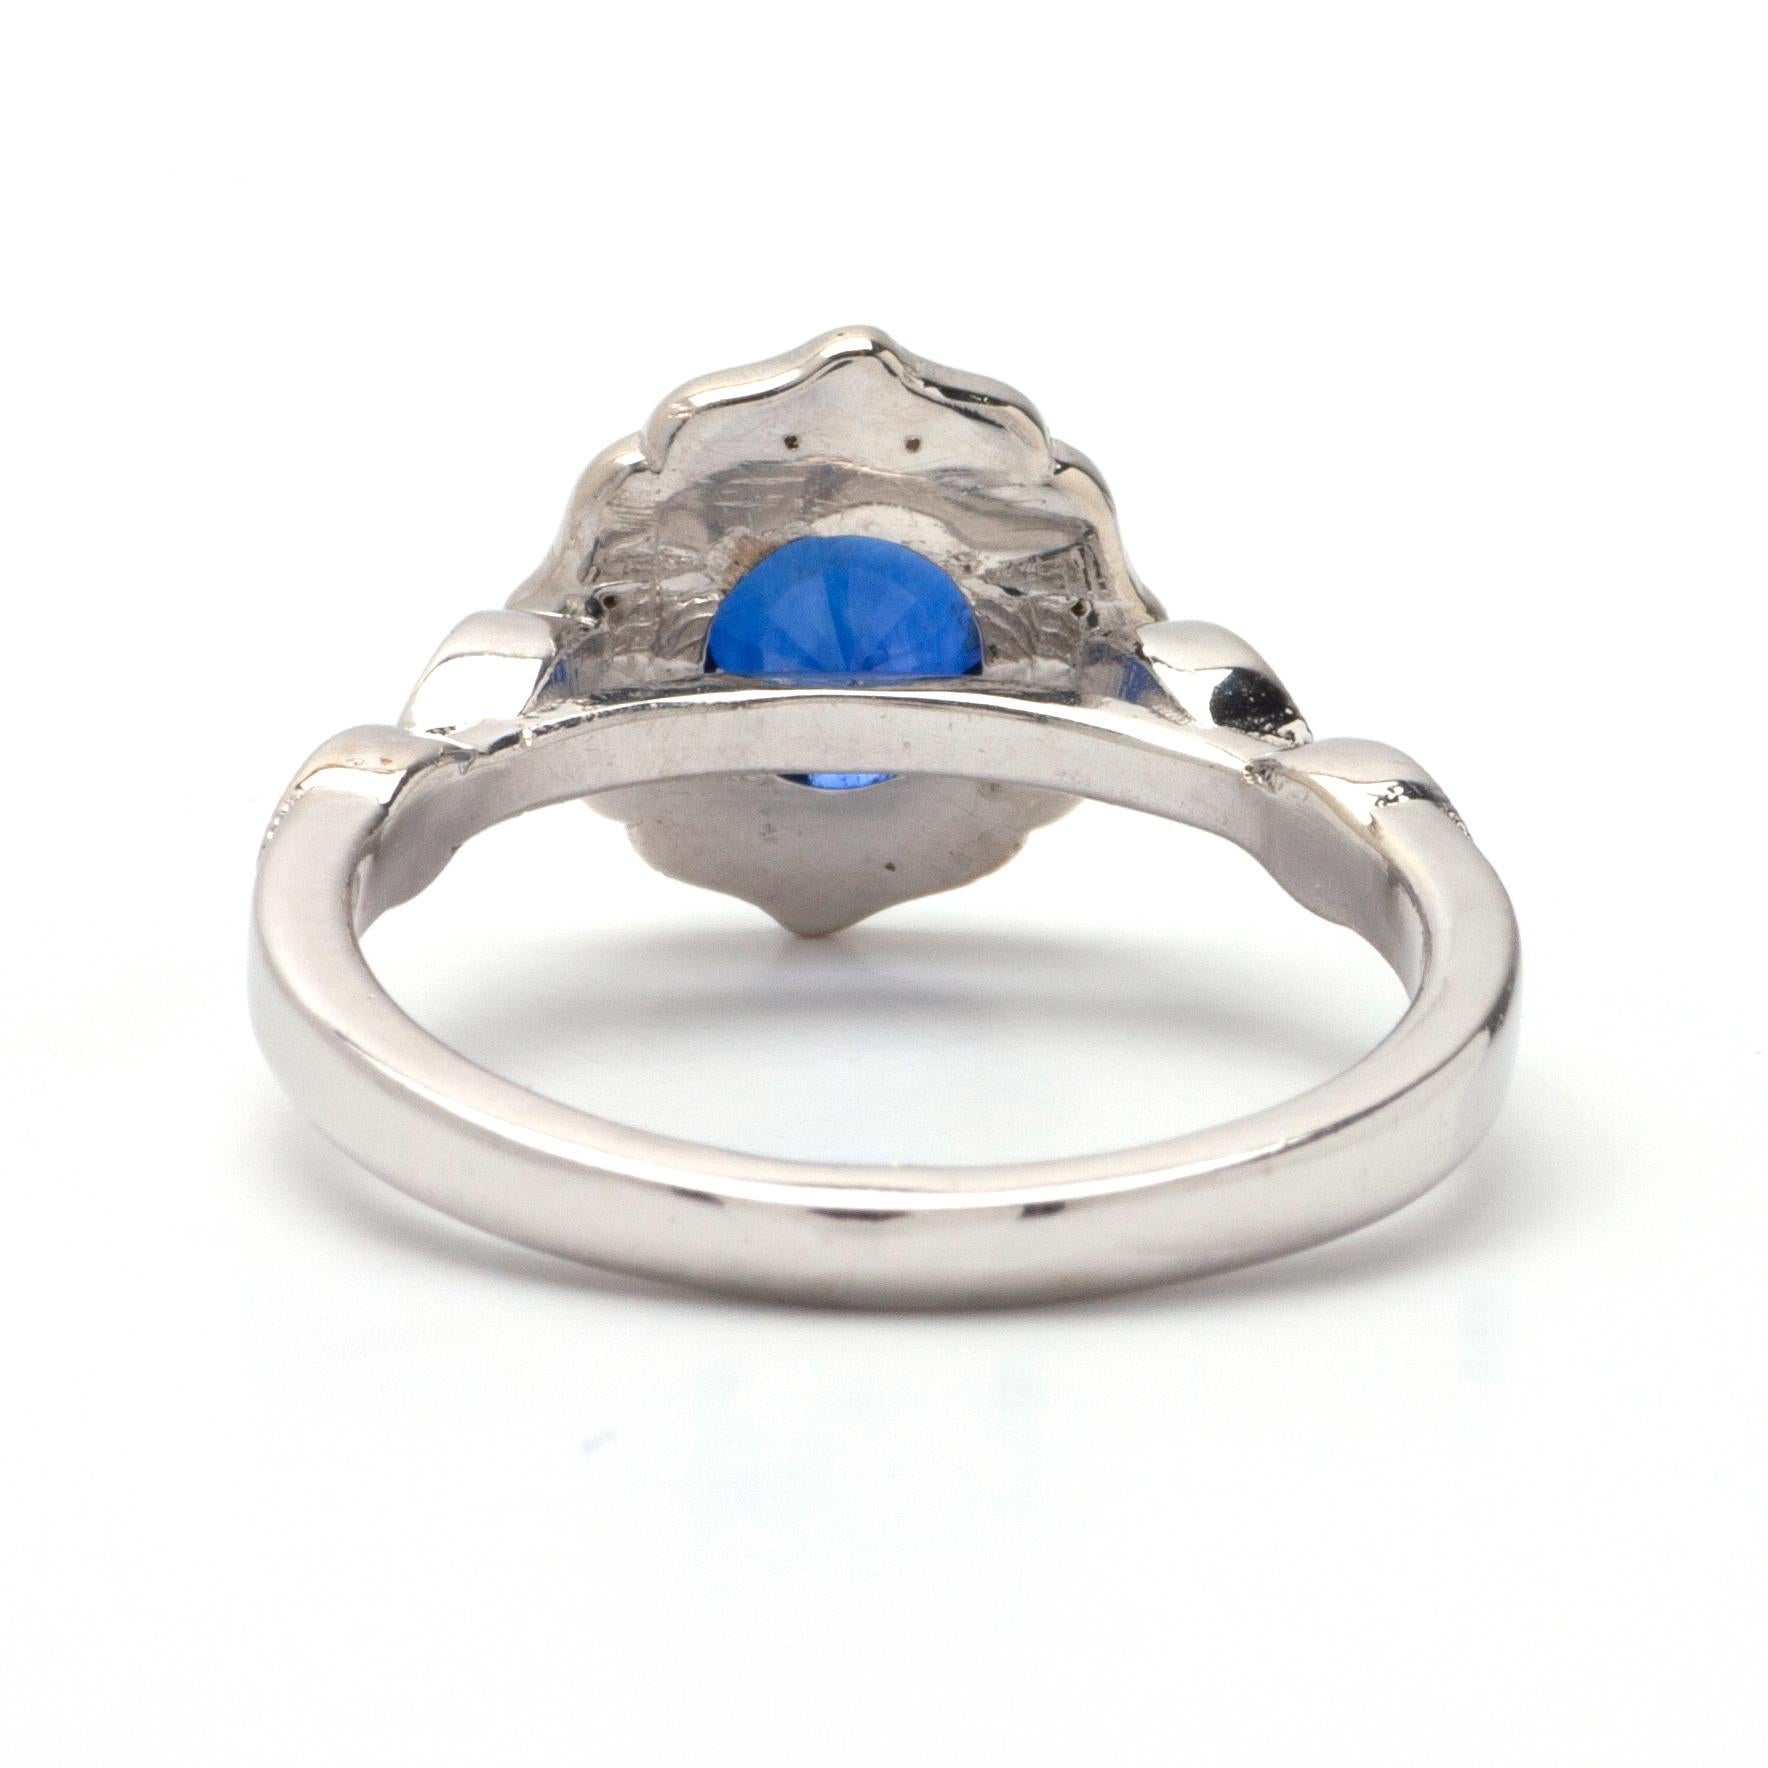 Round Cut 1.06ct Round Sapphire Ring in 14K White Gold, 0.25ct Side Diamonds For Sale